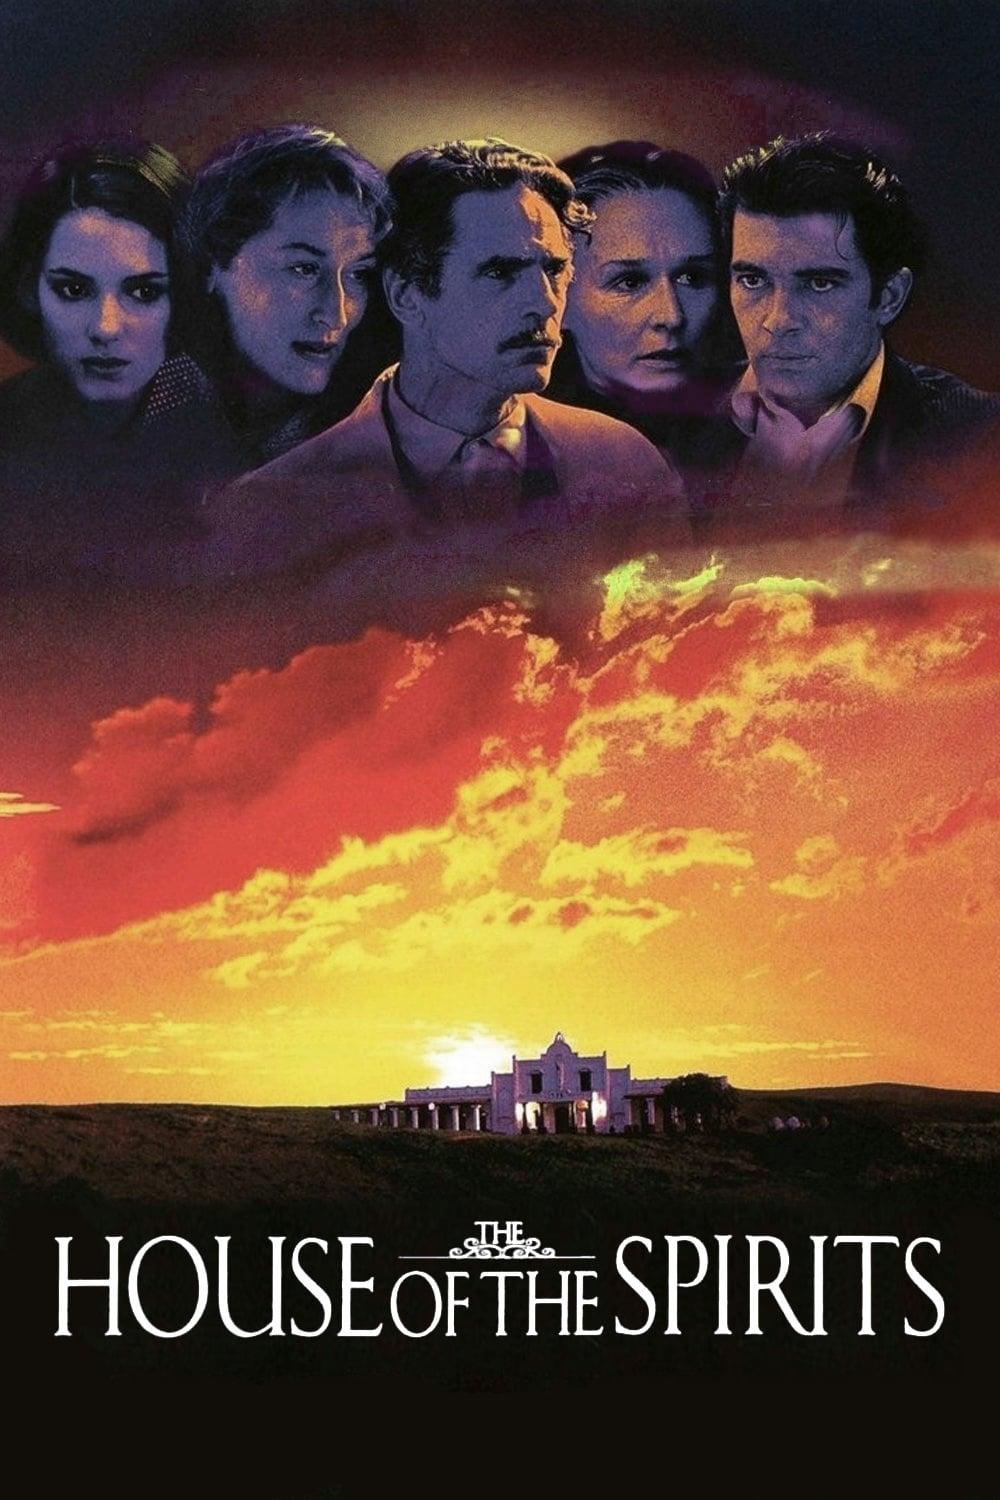 The House of the Spirits poster